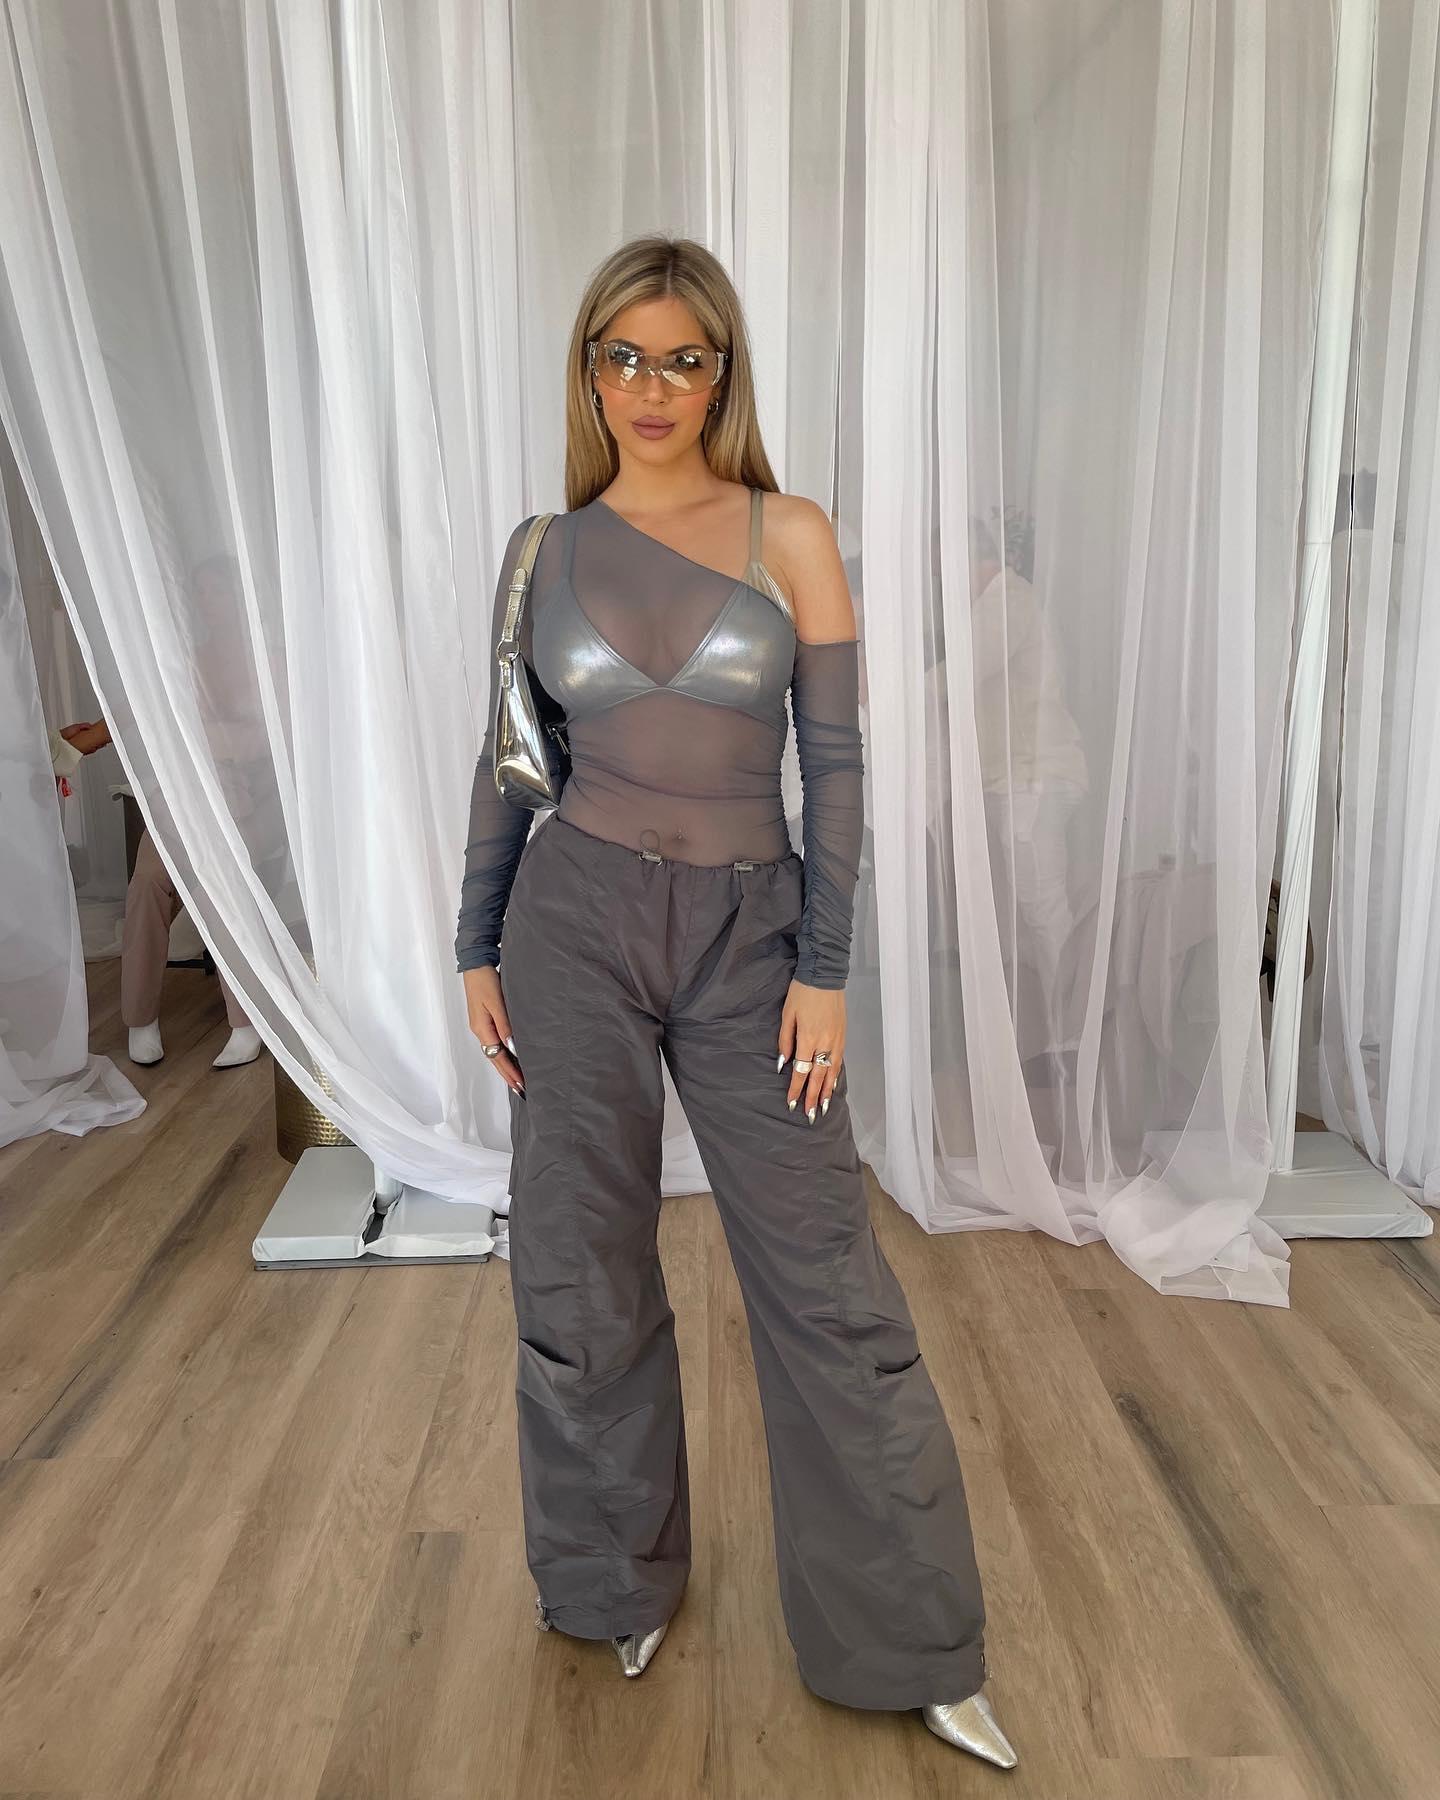 Sophia Pierson gives Y2K vibes in a see-through shirt